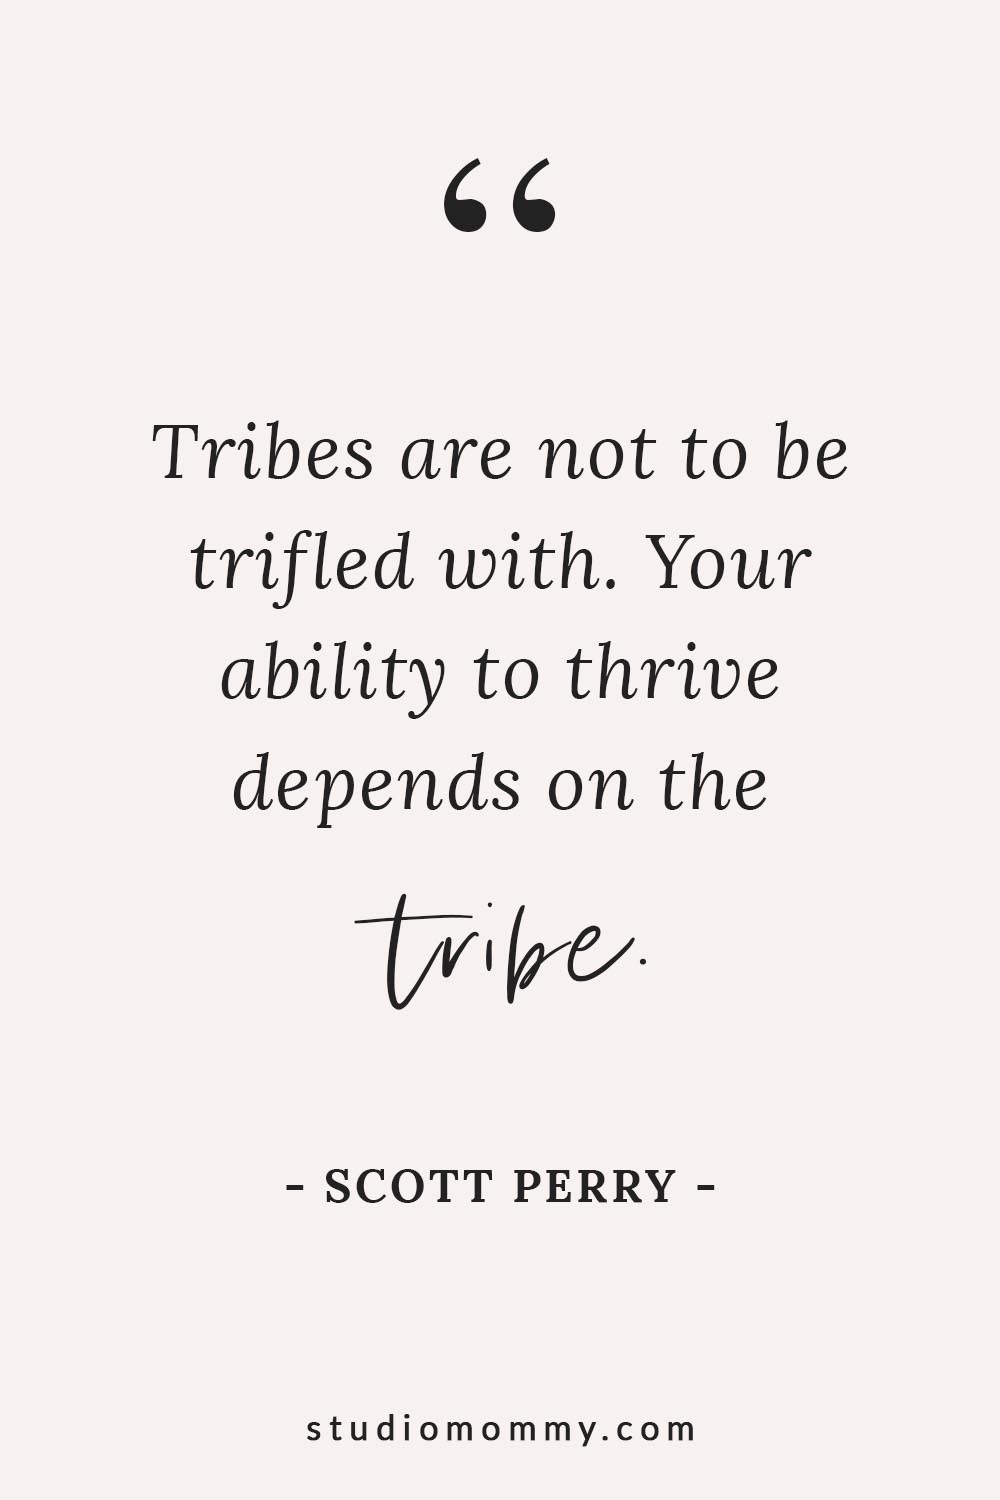 Tribes are not to be trifled with. Your ability to thrive depends on the tribe. - Scott Perry, Endeavor: Thrive Through Work Aligned with Your Values, Talents, and Tribe. #blogposts #blogtribe #bloggertips